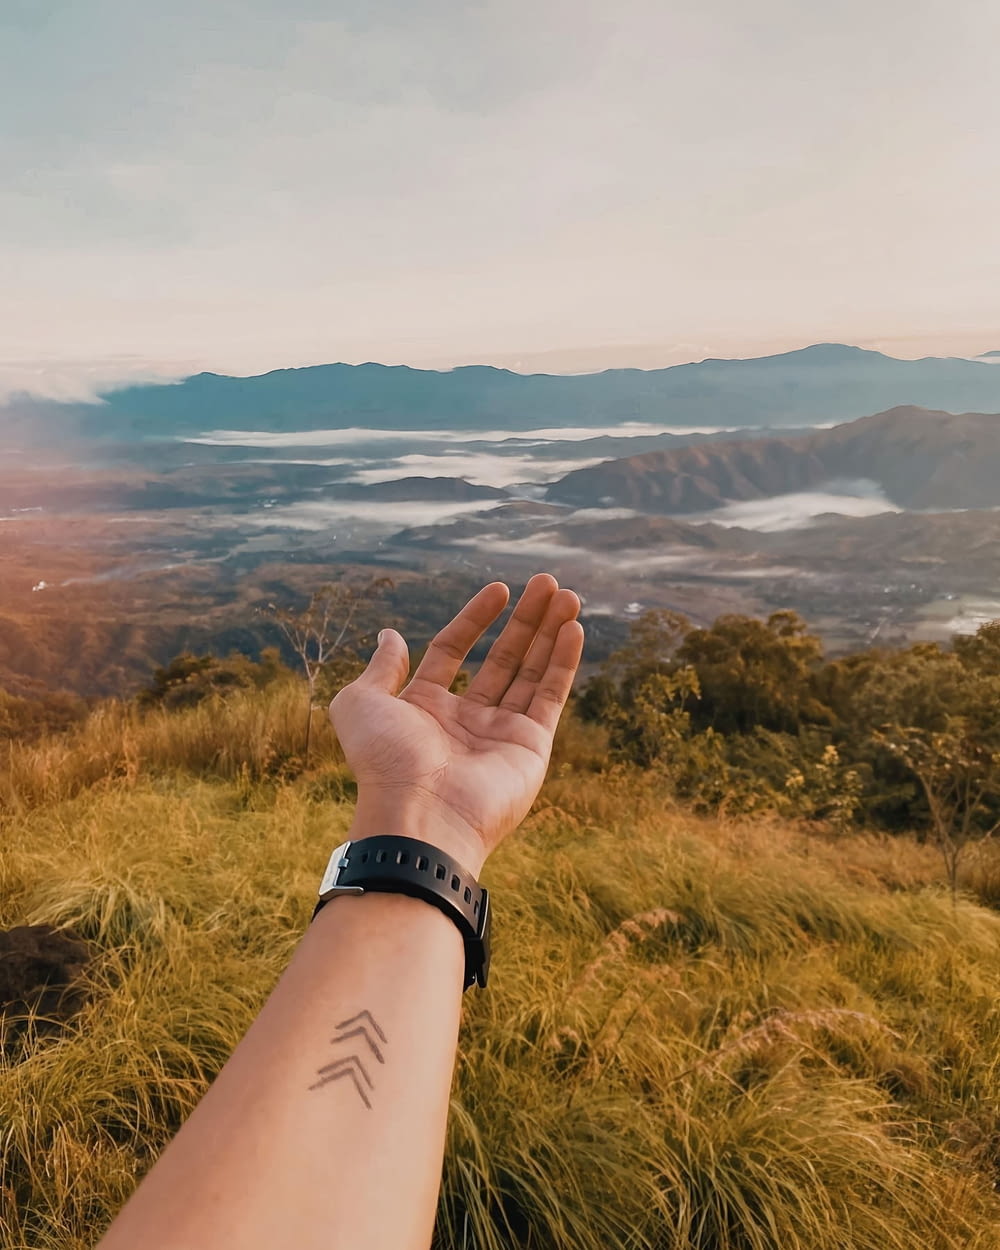 a hand with a watch on a hill overlooking a valley